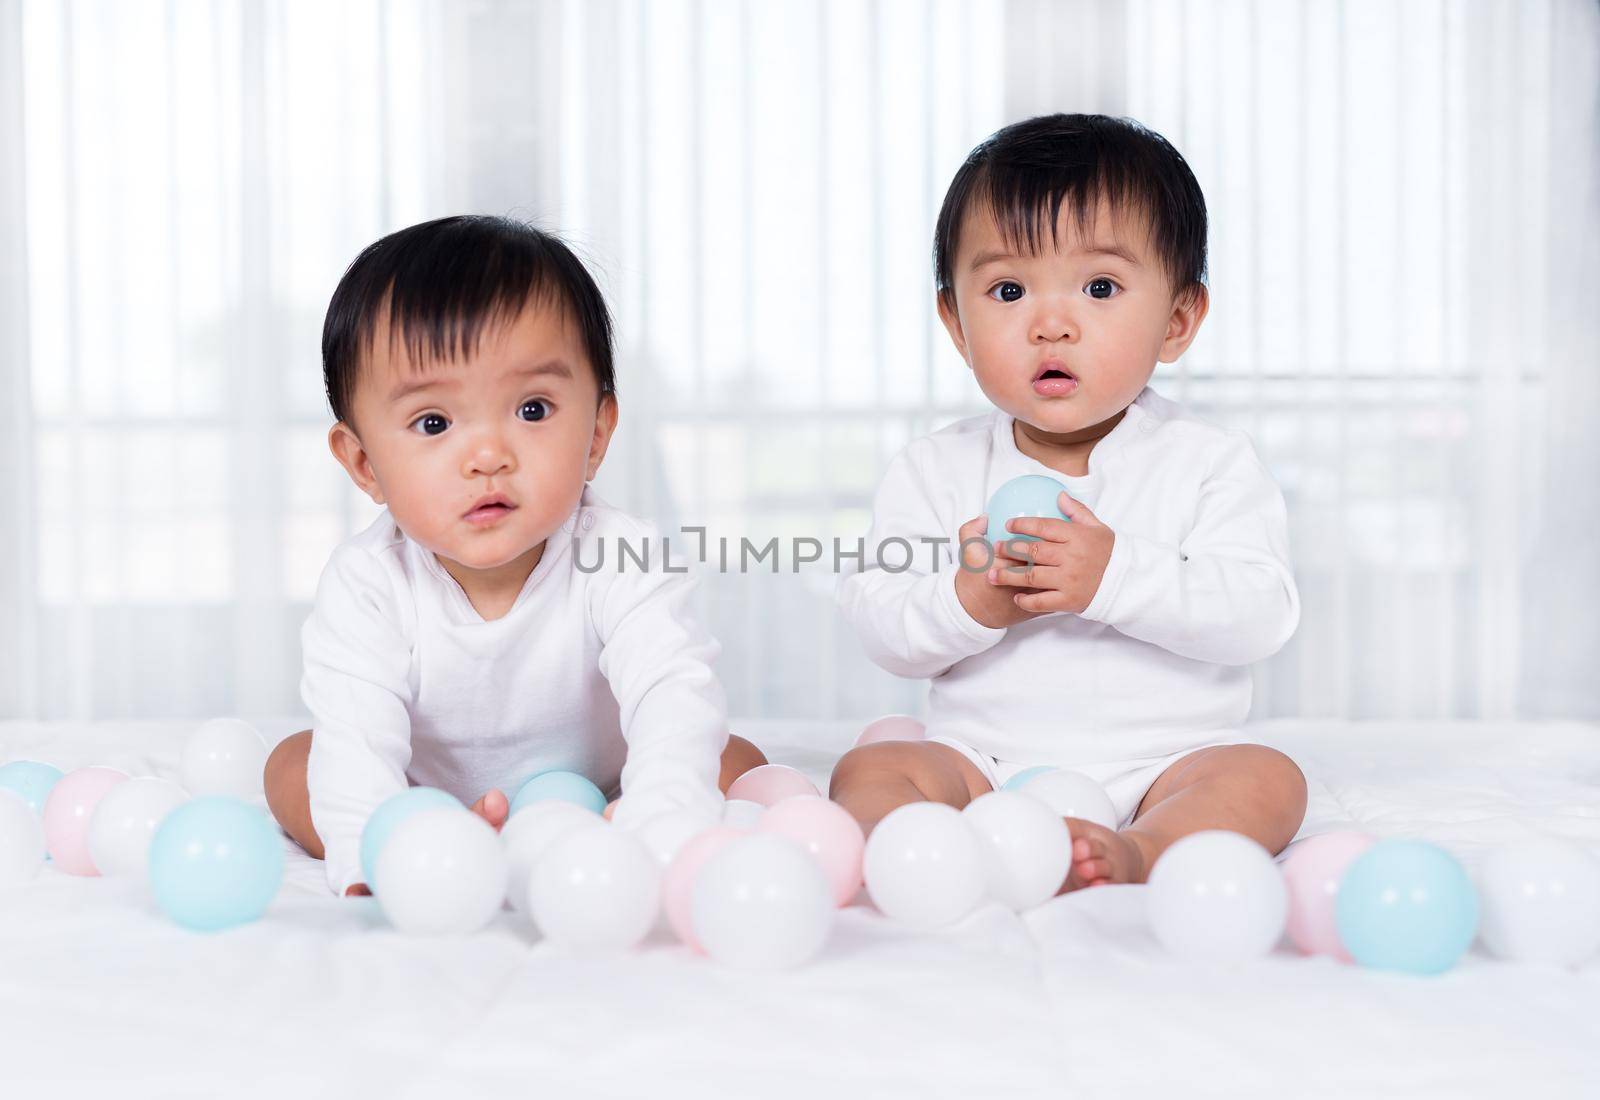 cheerful twin babies playing color ball on a bed